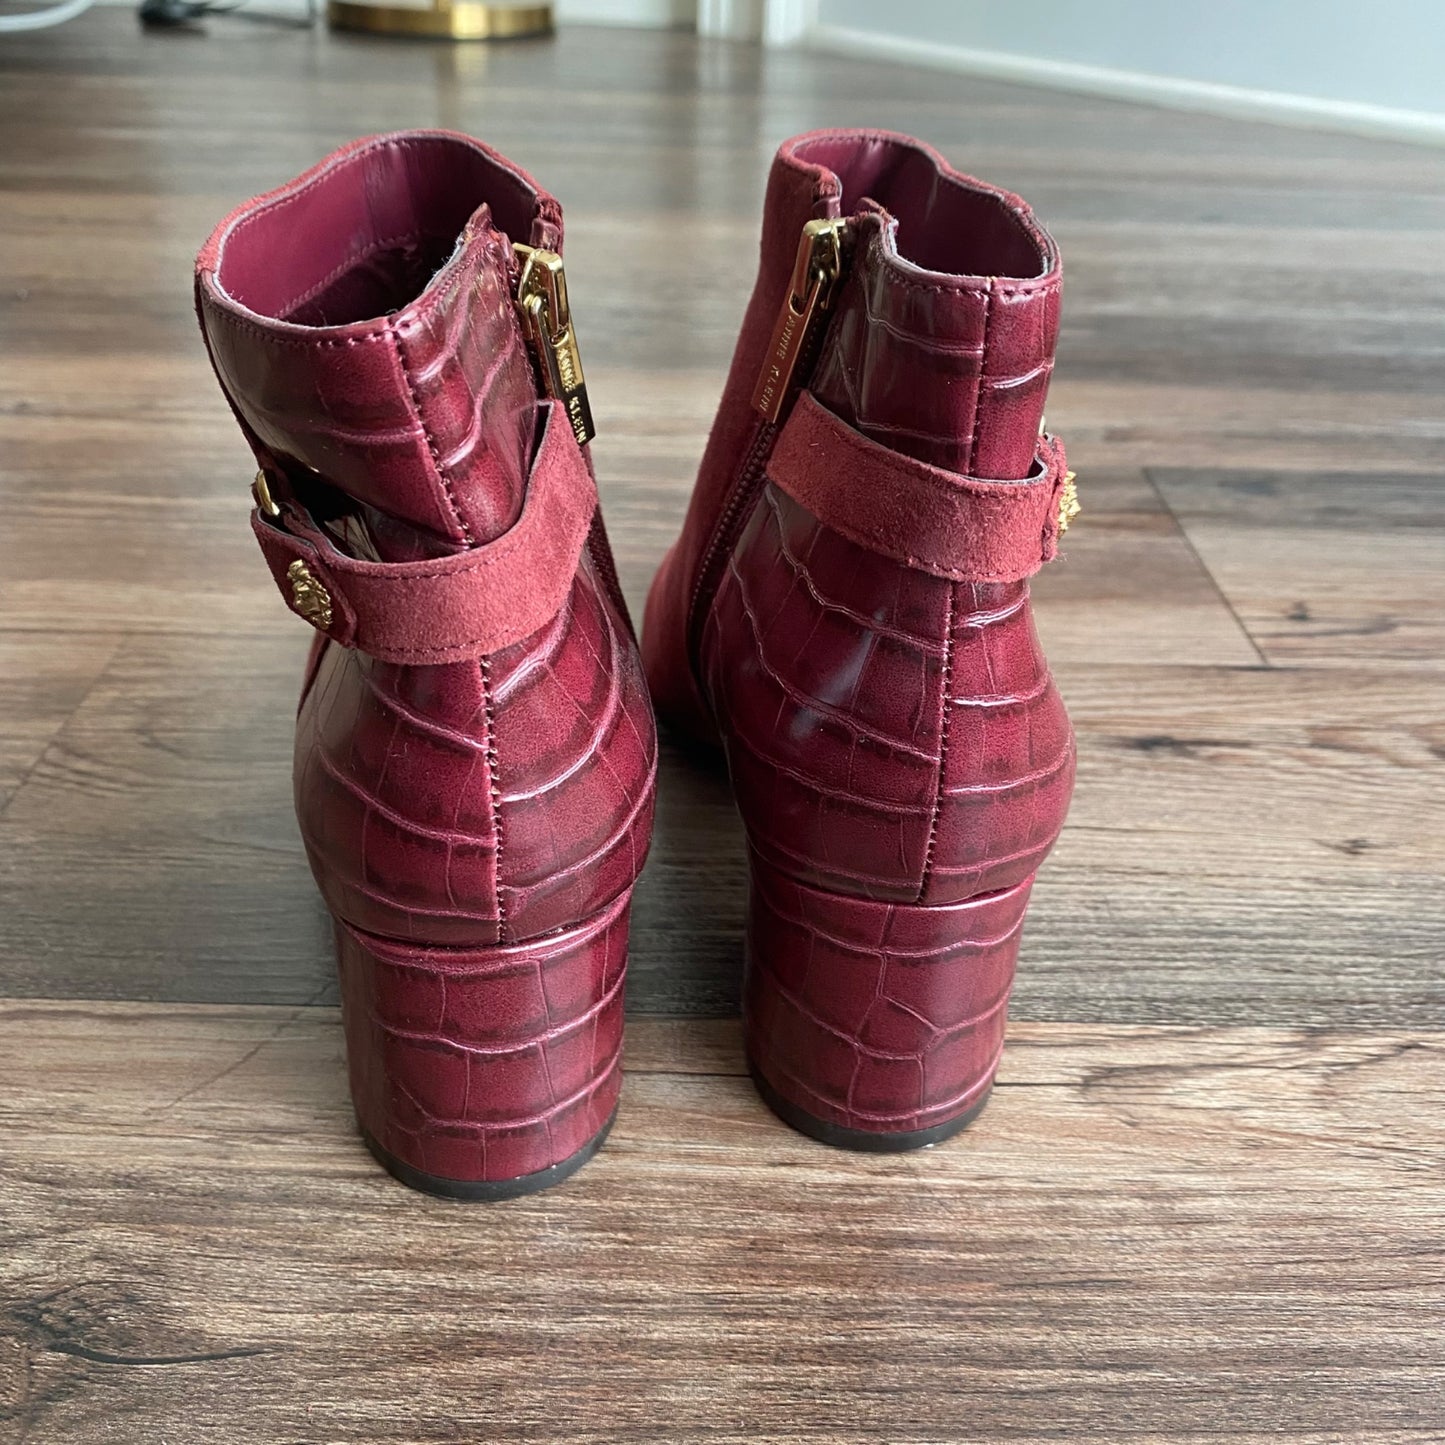 Anne Klein 6M burgundy leather ankle zip boots booties